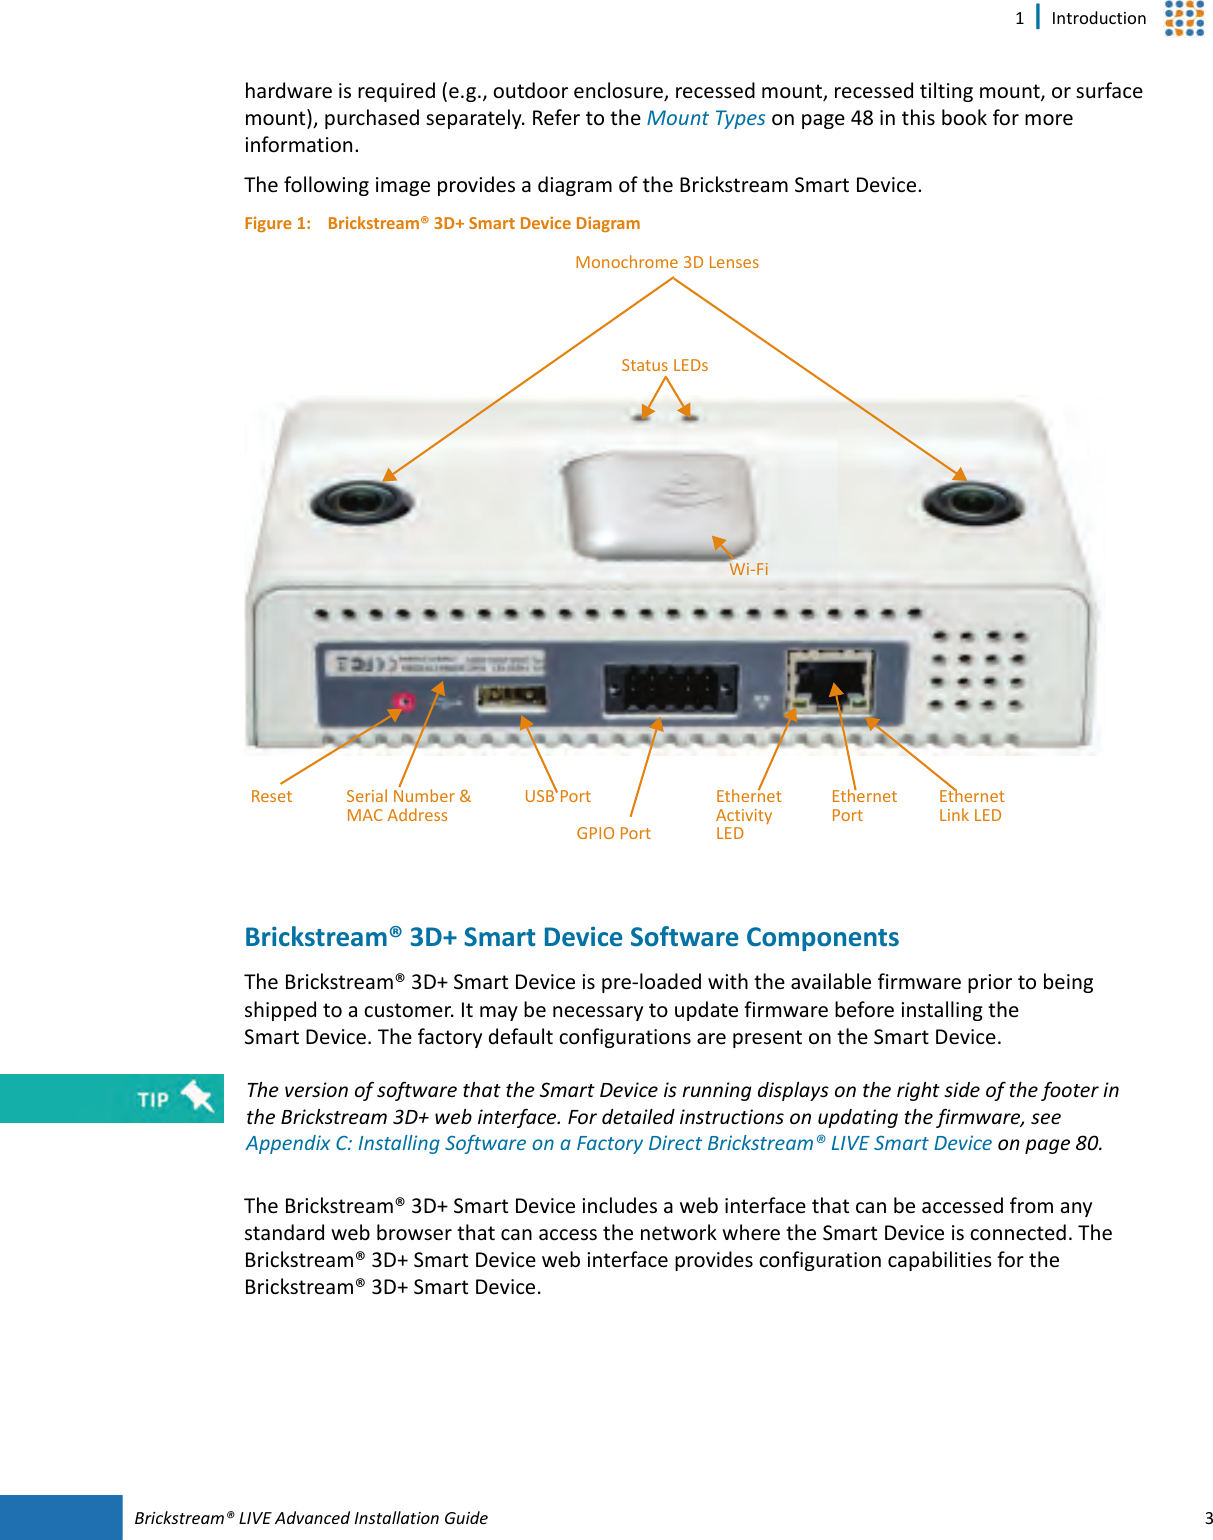 Brickstream®  LIVE Advanced Installation Guide 31 | Introductionhardware is required (e.g., outdoor enclosure, recessed mount, recessed tilting mount, or surface mount), purchased separately. Refer to the Mount Types on page  48 in this book for more information.The following image provides a diagram of the Brickstream Smart Device.Figure 1: Brickstream® 3D+ Smart Device DiagramBrickstream®  3D+ Smart  Device Software ComponentsThe Brickstream® 3D+ Smart  Device is pre-loaded with the available firmware prior to being shipped to a customer. It may be necessary to update firmware before installing the Smart  Device. The factory default configurations are present on the Smart Device. The Brickstream® 3D+ Smart  Device includes a web interface that can be accessed from any standard web browser that can access the network where the Smart  Device is connected. The Brickstream® 3D+ Smart  Device web interface provides configuration capabilities for the Brickstream® 3D+ Smart Device. Status LEDsMonochrome 3D LensesUSB PortGPIO PortEthernet Activity LEDEthernet Link LEDReset Serial Number &amp; MAC AddressEthernet PortWi-FiThe version of software that the Smart Device is running displays on the right side of the footer in the Brickstream  3D+ web interface. For detailed instructions on updating the firmware, see Appendix C: Installing Software on a Factory Direct Brickstream® LIVE Smart Device on page 80.